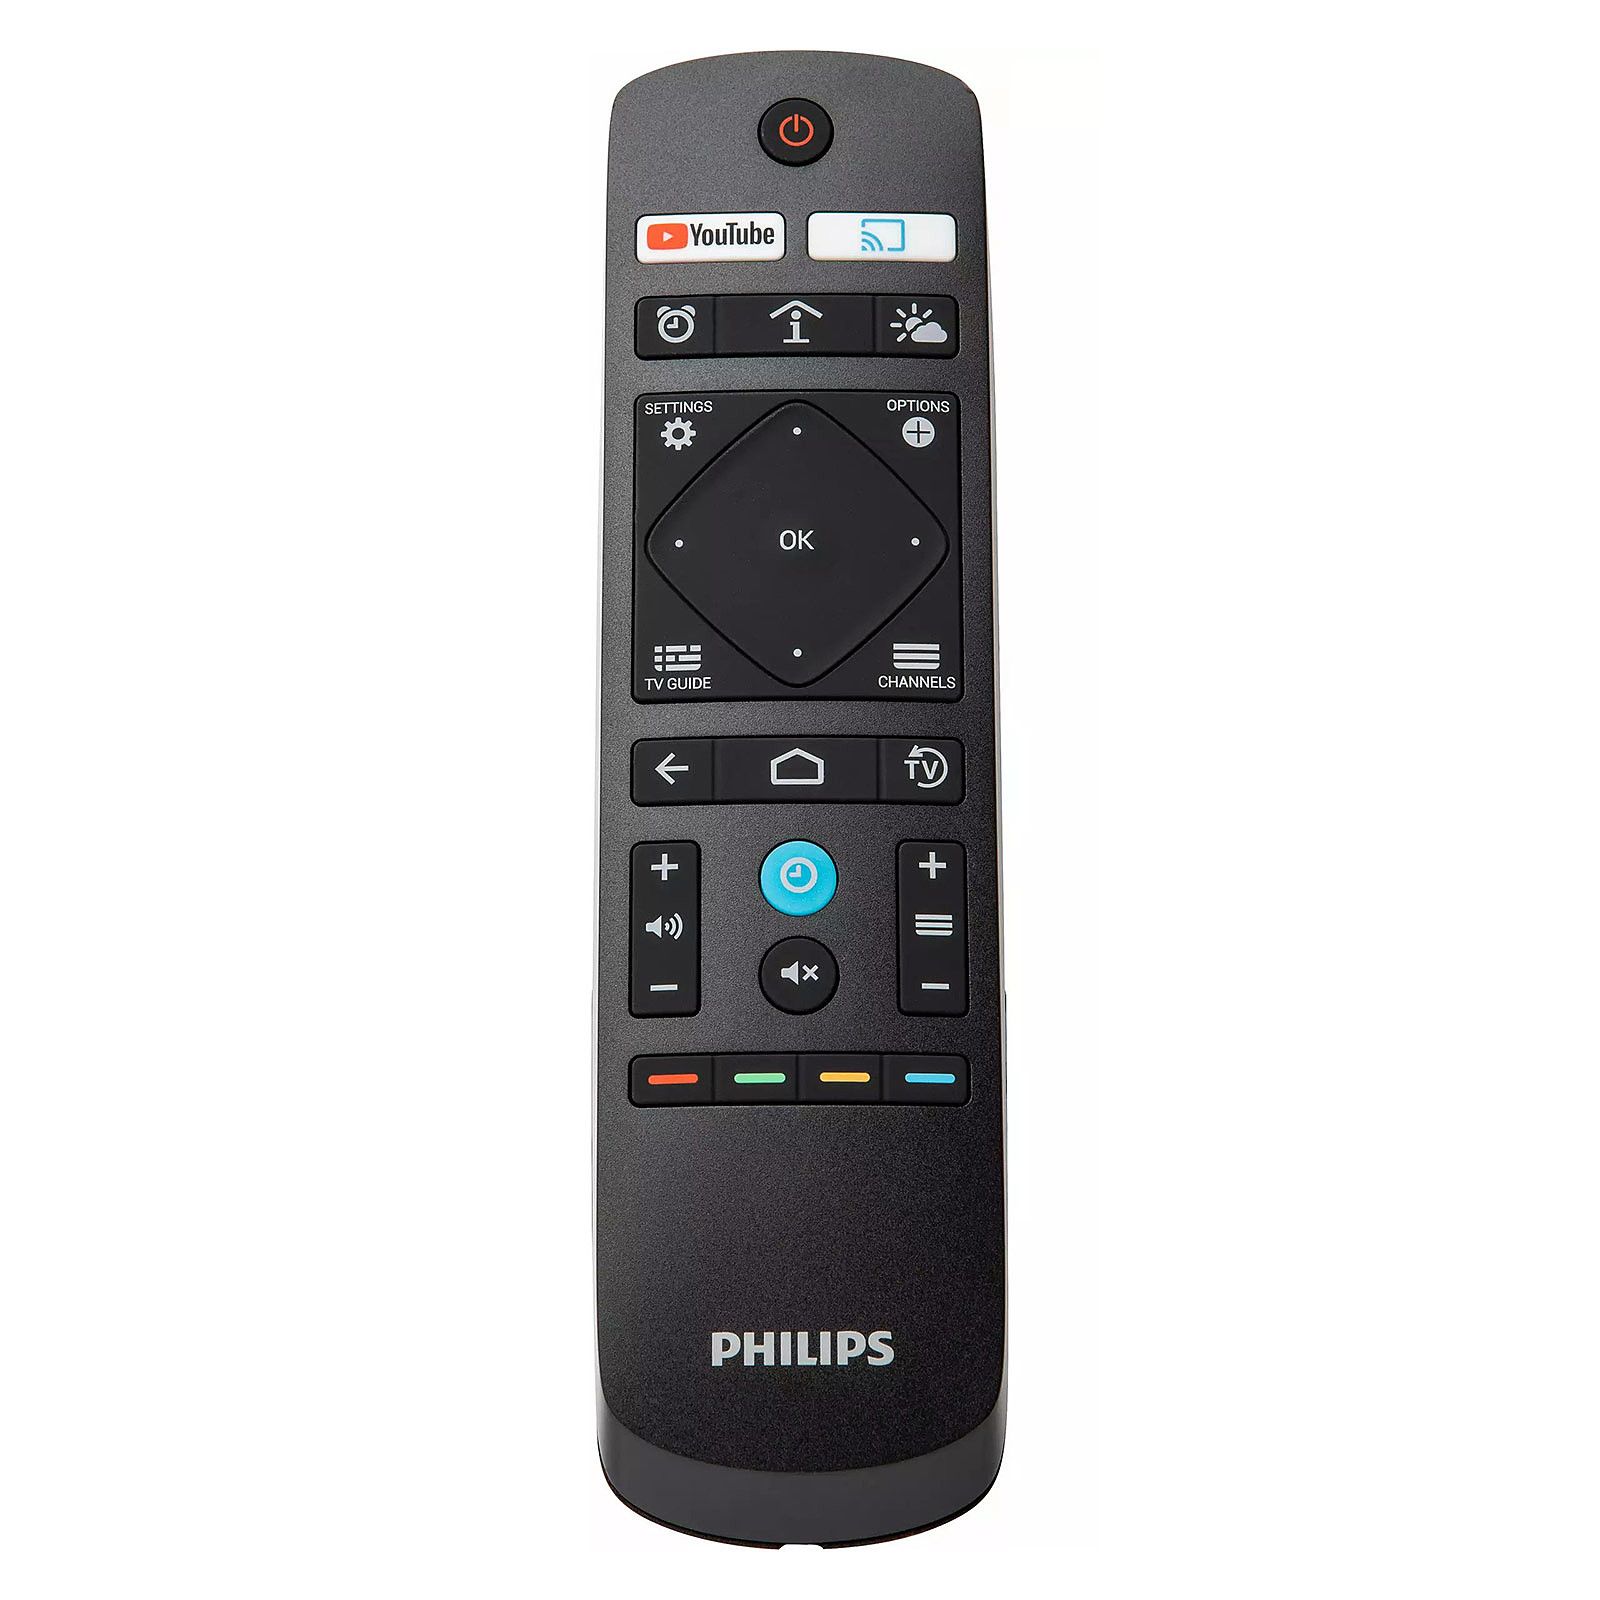 Ecran profesional Televizor Business TV Philips 58” B-Line, 4K UHD, Chromecast built-in, Google Play Store, DVB-C/T/T2 Tuner, HDMI, Scheduler, Auto on/off, Crestron Connected Certified v2, Neets/Extron compatible, CMND Create & Control_3